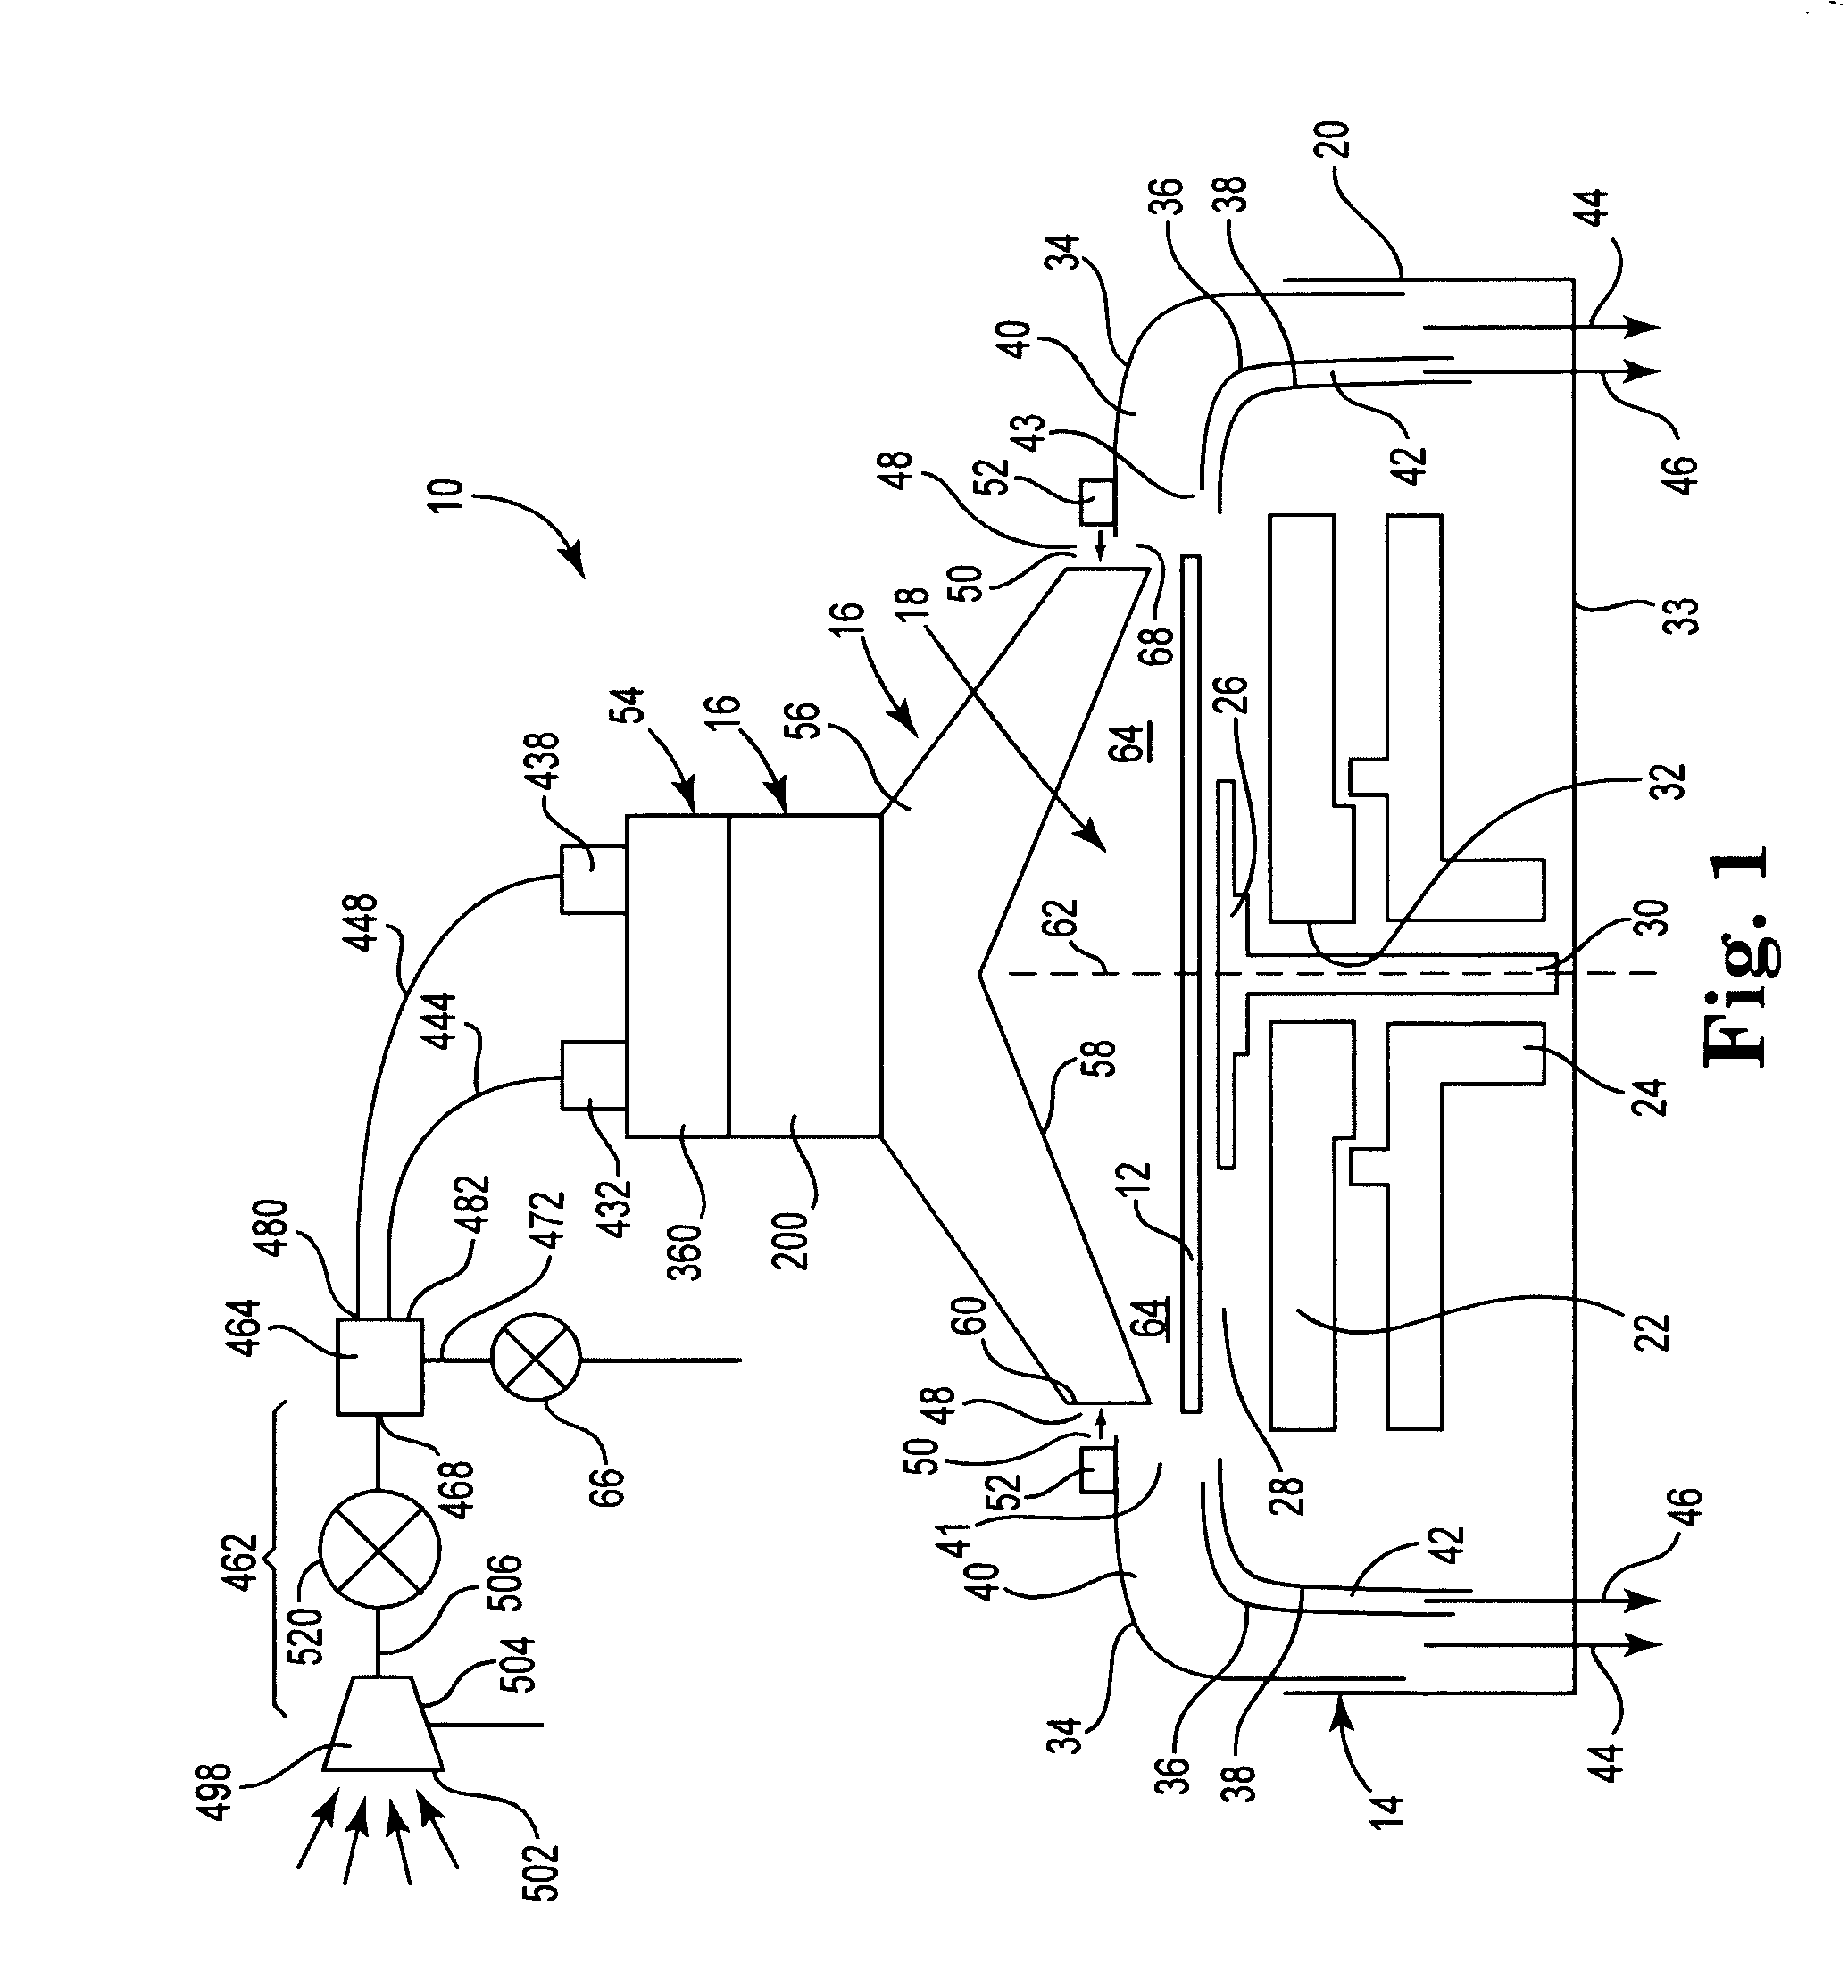 Tools and methods for processing microelectronic workpieces using process chamber designs that easily transition between open and closed modes of operation